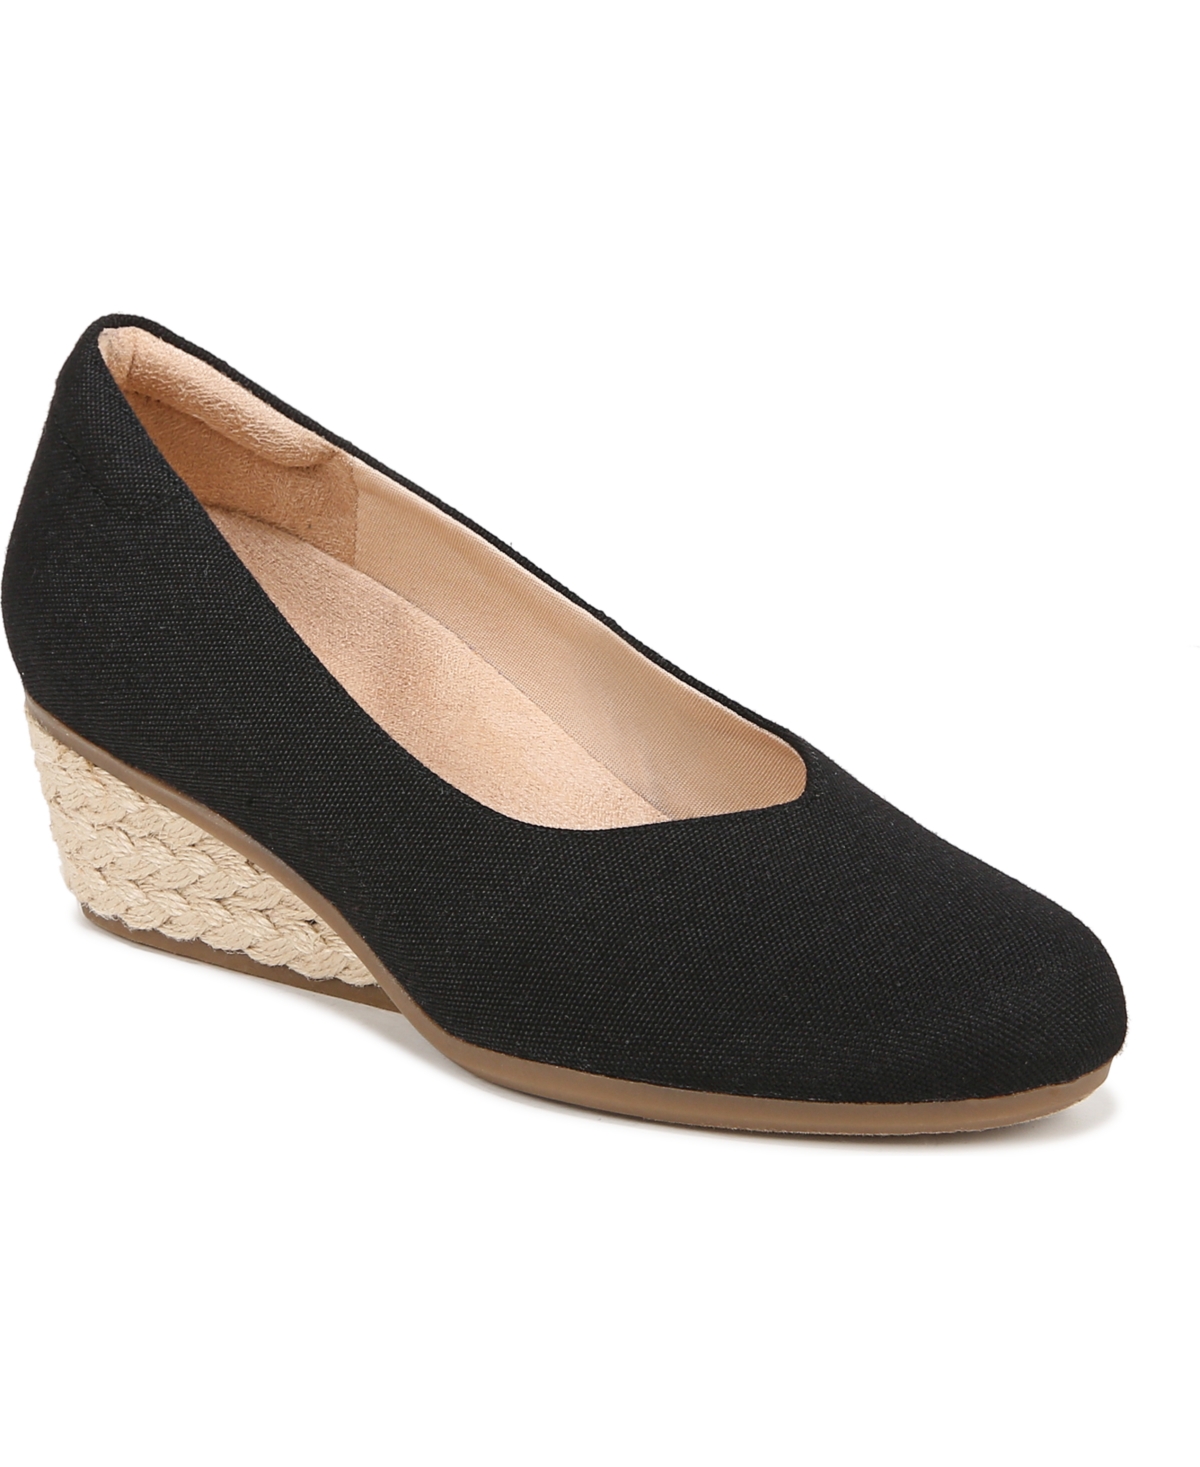 Dr. Scholl's Women's Be Ready Wedge Pumps In Black Fabric